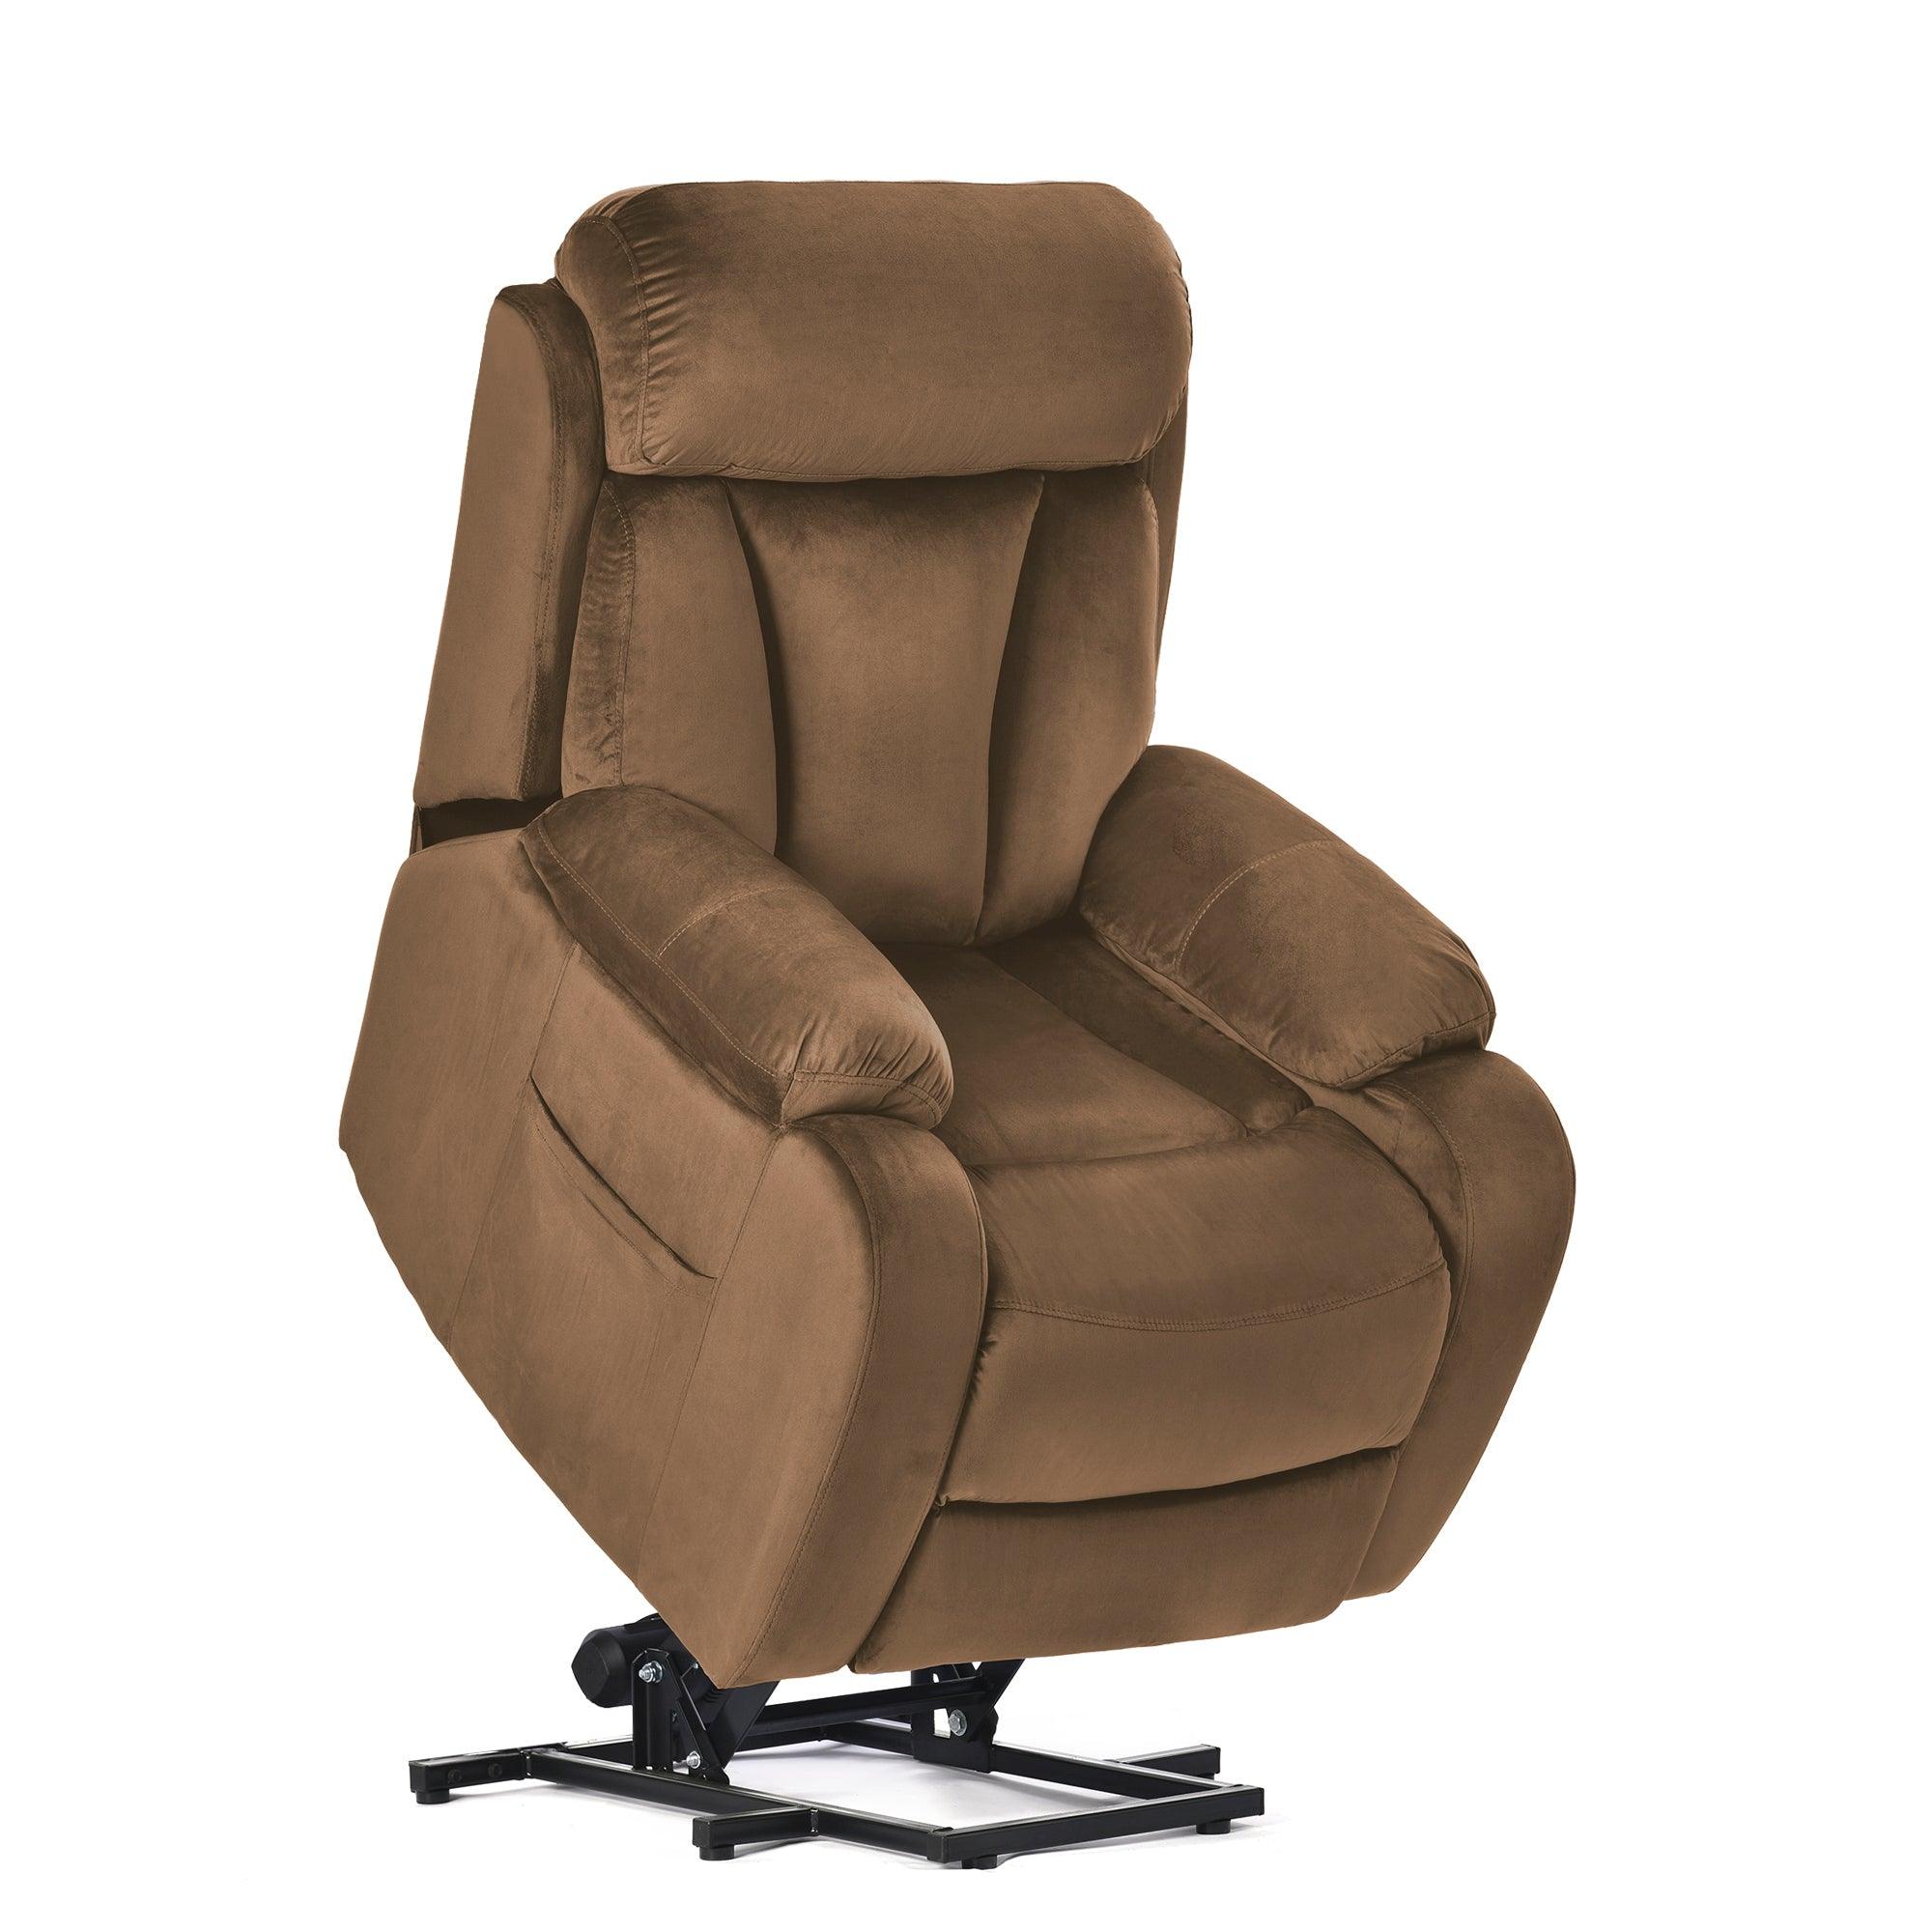 🆓🚛 Lift Chair Recliner for Elderly Power Remote Control Recliner Sofa Relax Soft Chair Anti-Skid, Brown